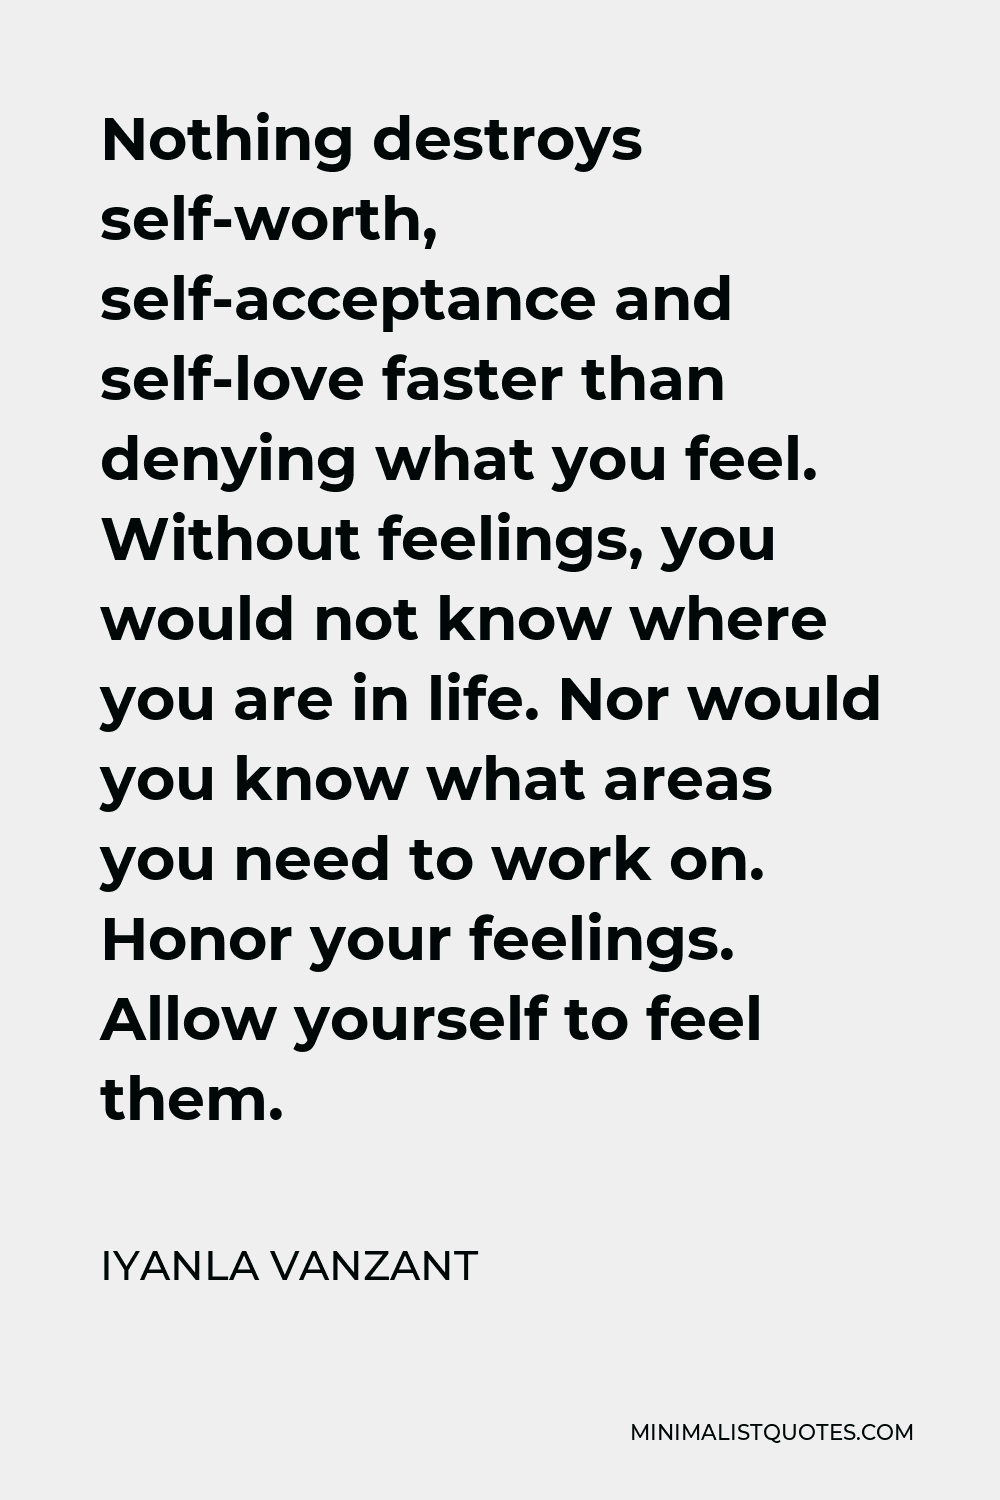 Iyanla Vanzant Quote - Nothing destroys self-worth, self-acceptance and self-love faster than denying what you feel. Without feelings, you would not know where you are in life. Nor would you know what areas you need to work on. Honor your feelings. Allow yourself to feel them.